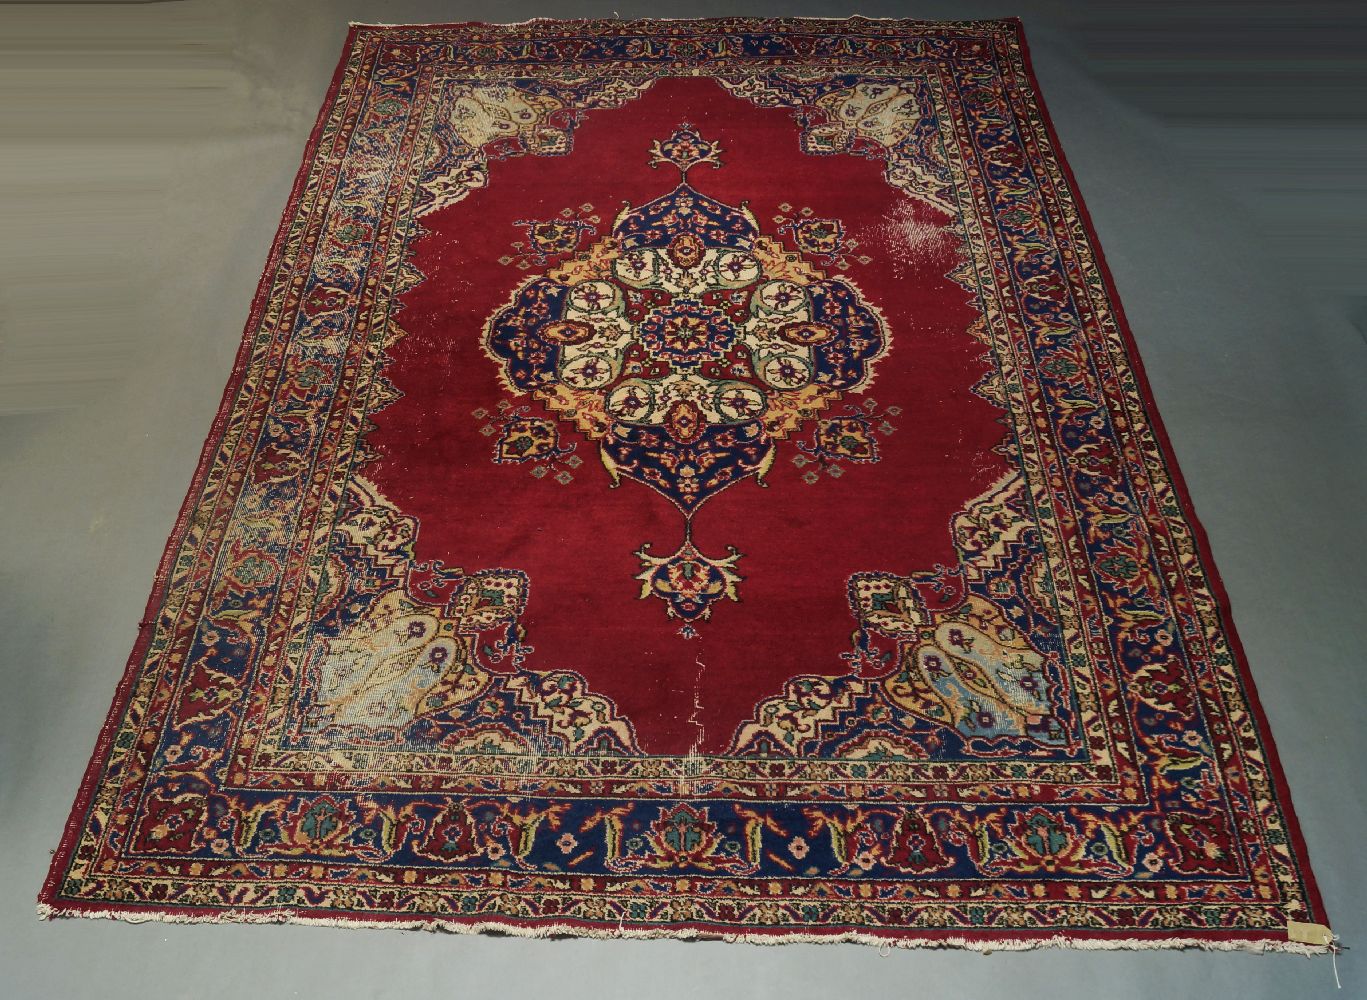 A Kazak rug, early to mid 20th Century, with six hook edged medallions in a red field, 260cm x 128cm - Image 2 of 3